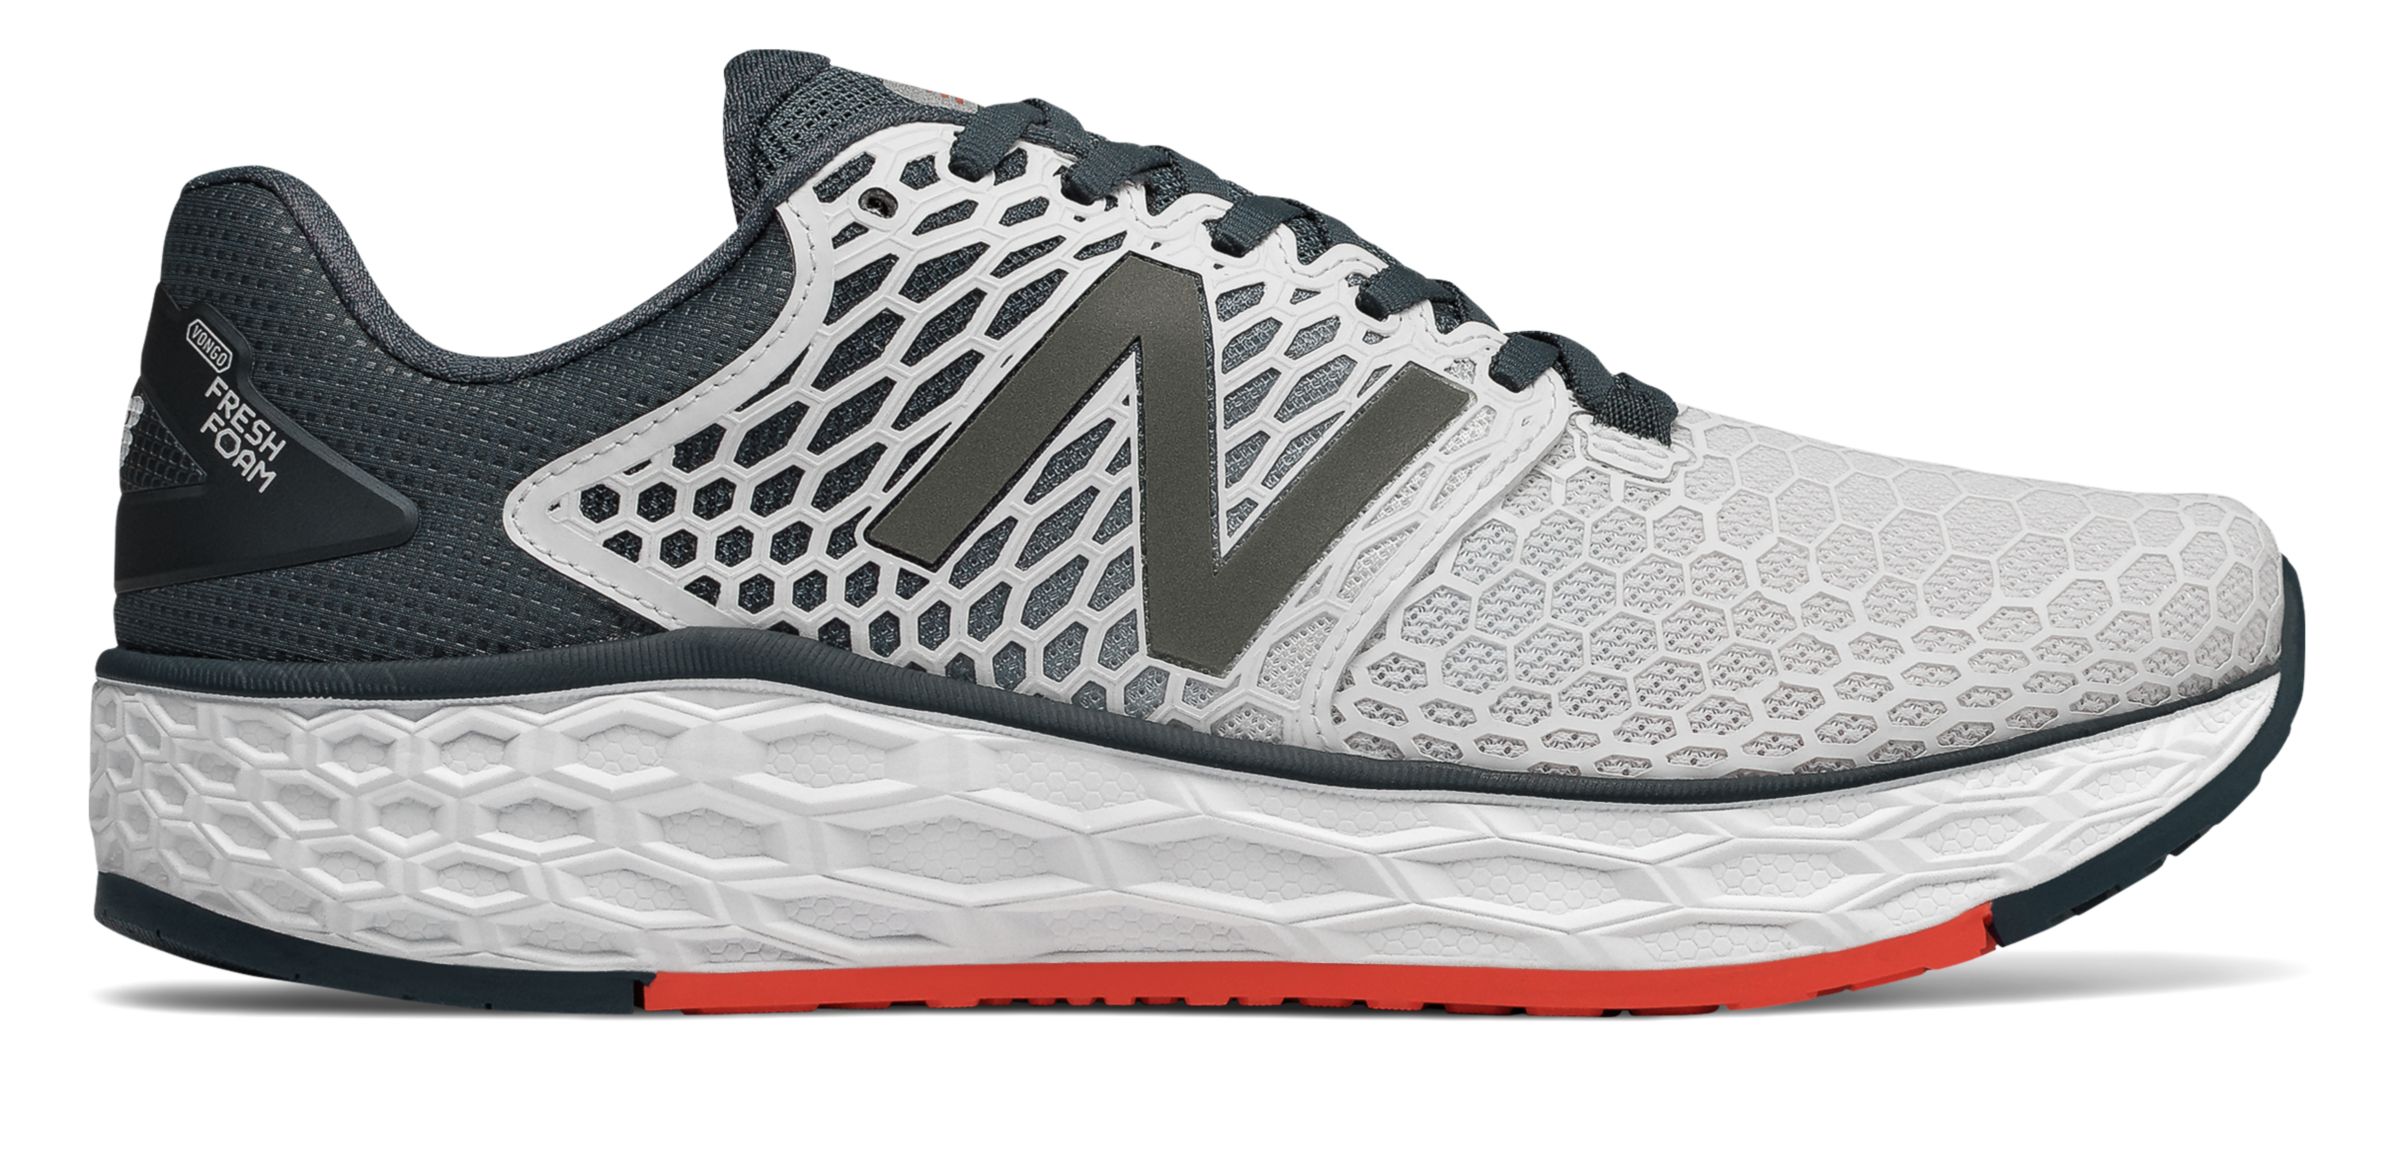 New Balance MVNGO-V3 on Sale - Discounts Up to 40% Off on MVNGOWP3 at Joe's  New Balance Outlet